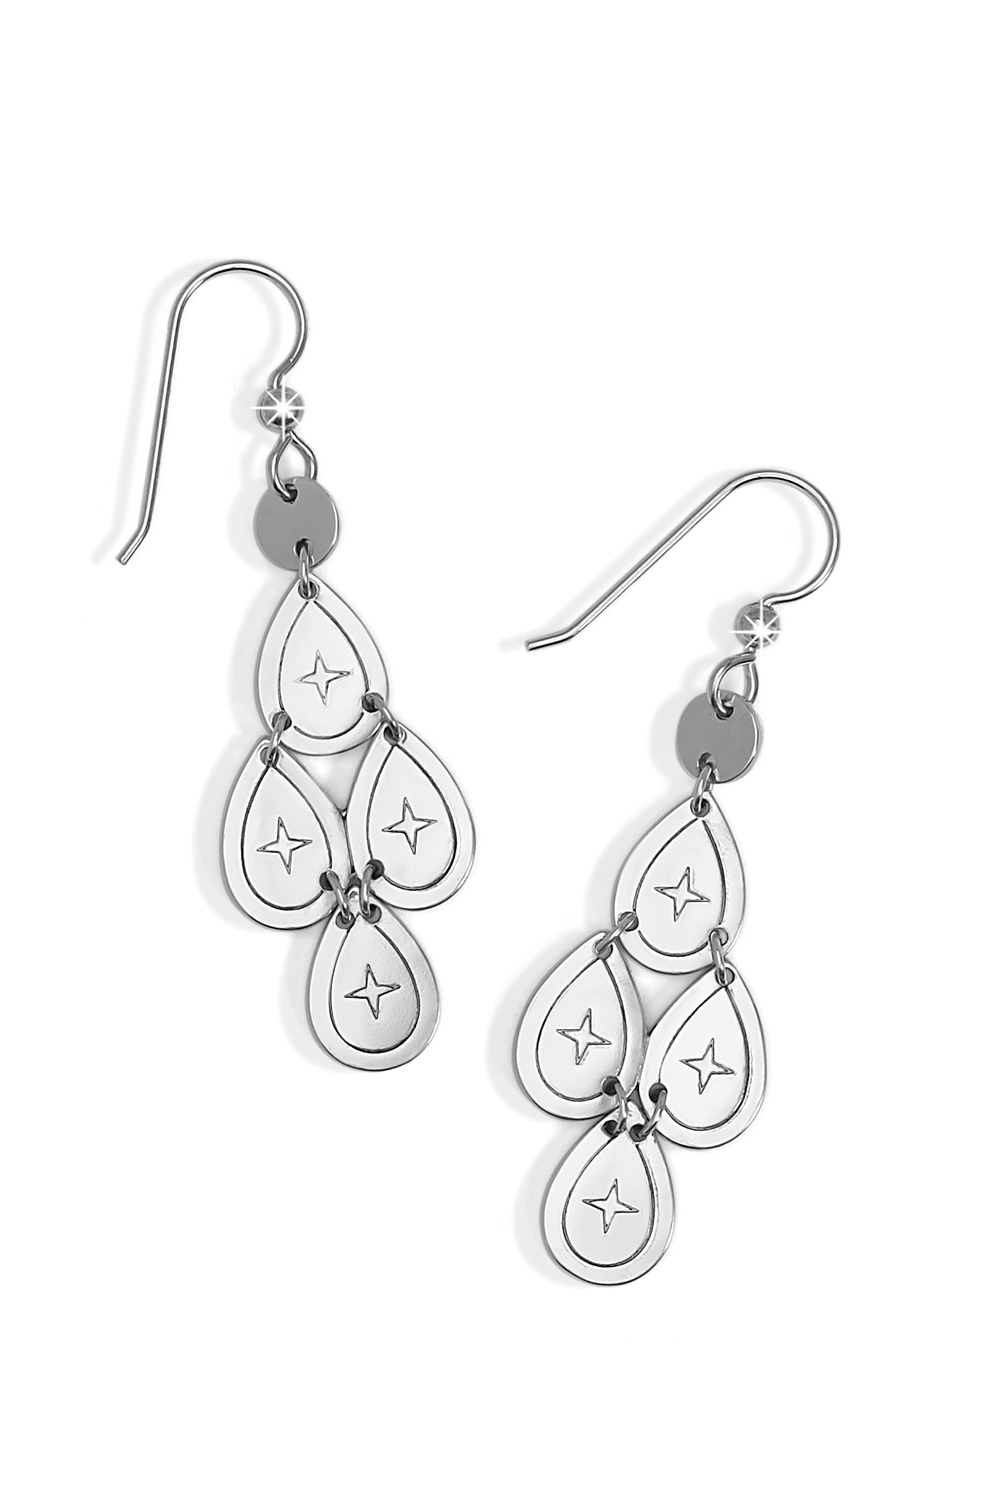 Palm Canyon Small Teardrop French Wire Earrings